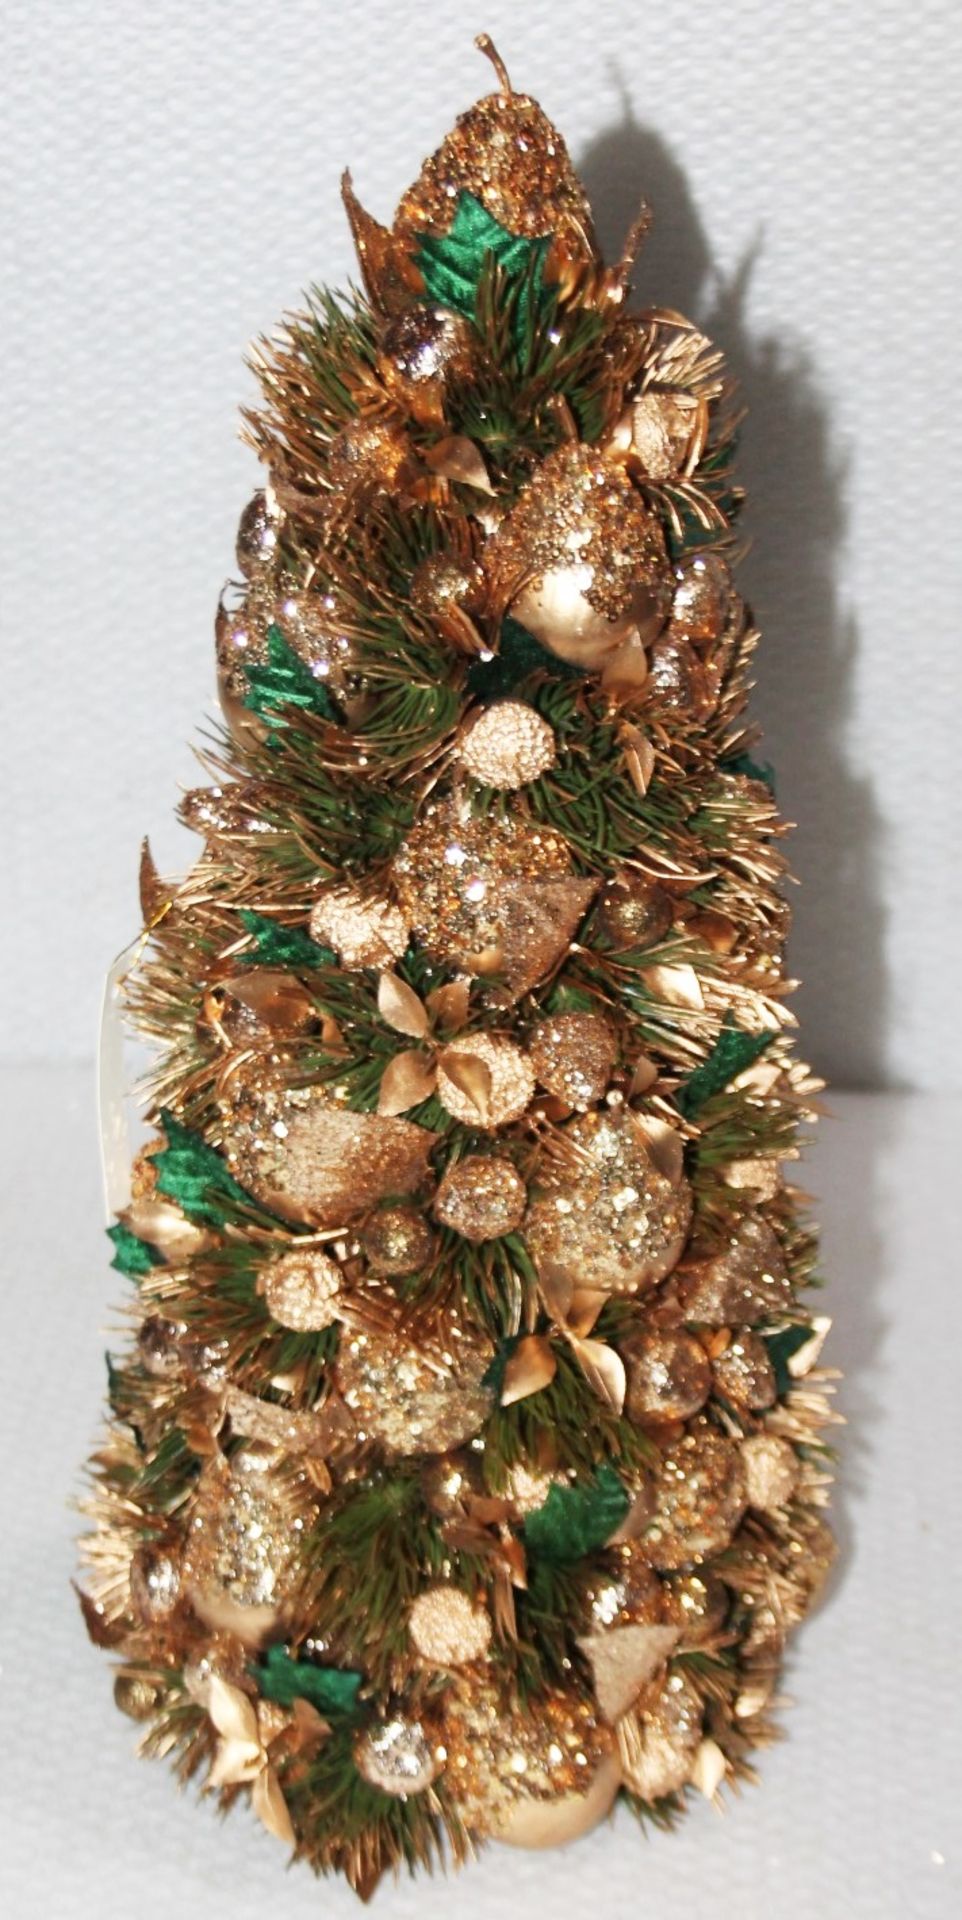 1 x SALZBURG CREATIONS Decorative 'Pear Tree' Ornament In Gold & Green - Original Price £300.00 - Image 7 of 9